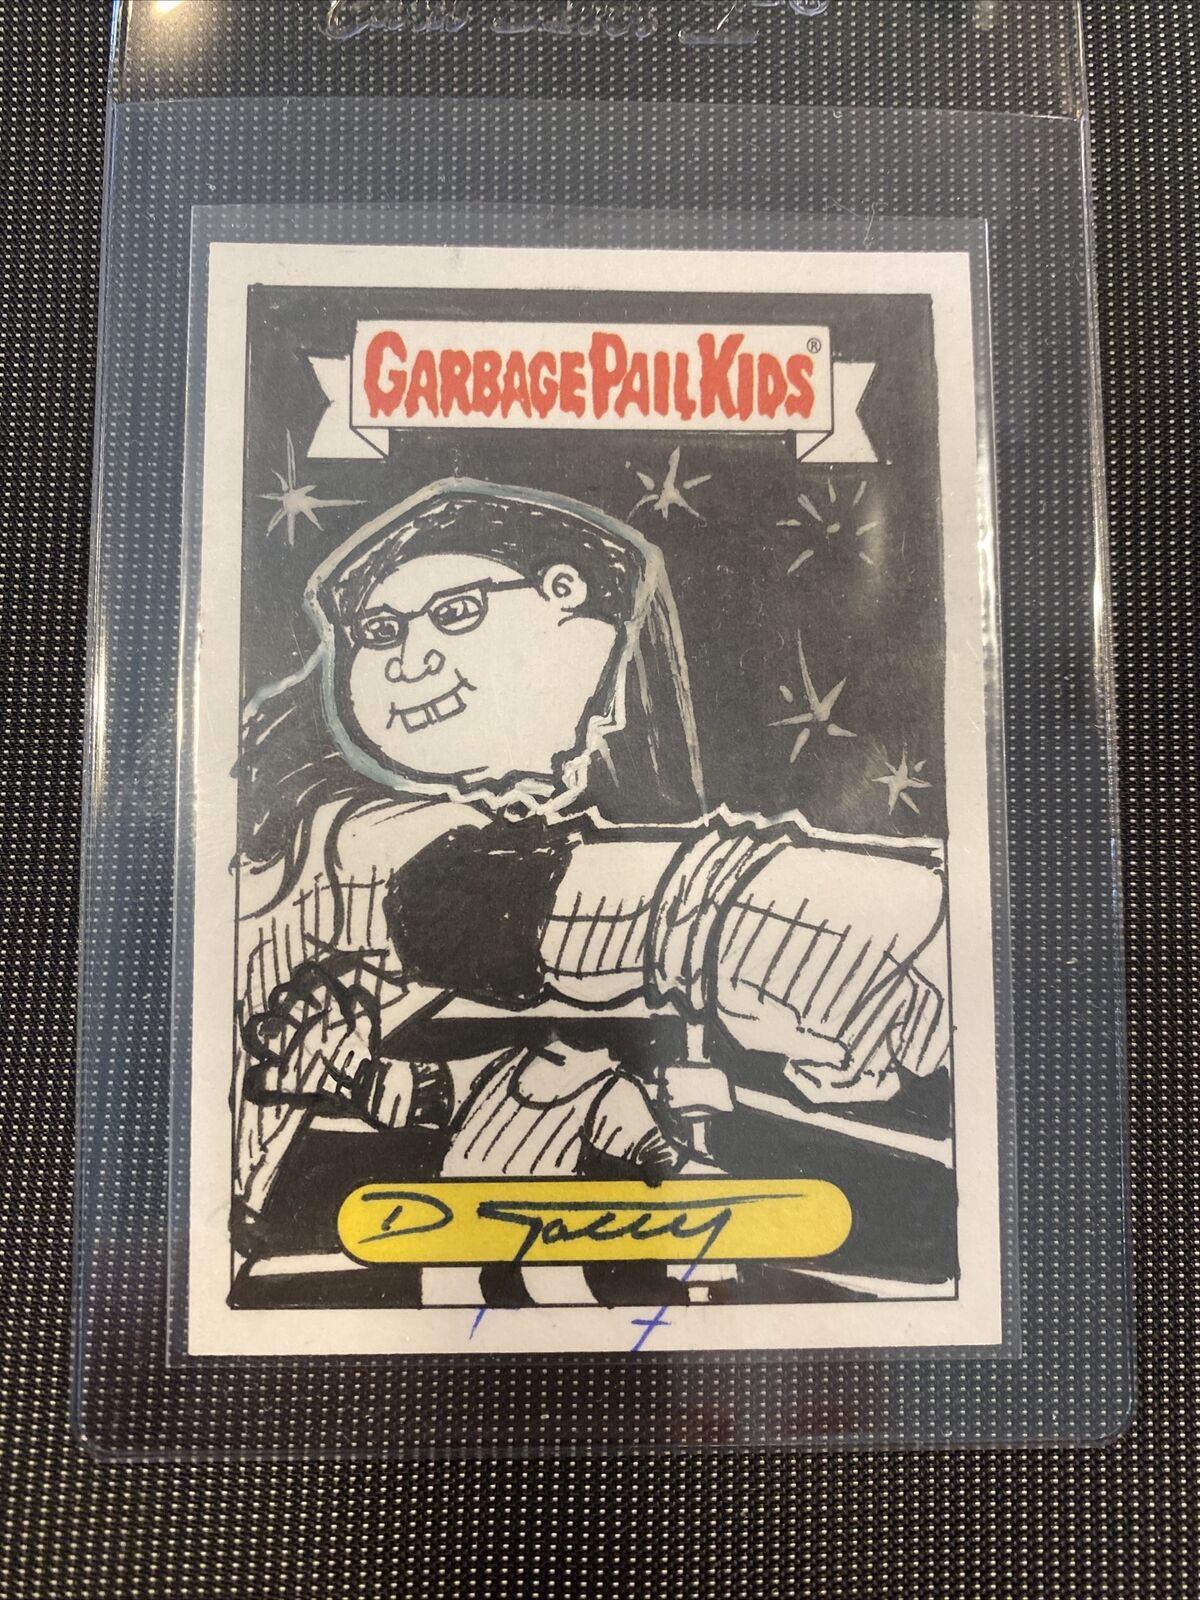 DAVE GACEY OFFICIAL SKETCH CARD GPK 2017 Battle of the Bands  (1/1)